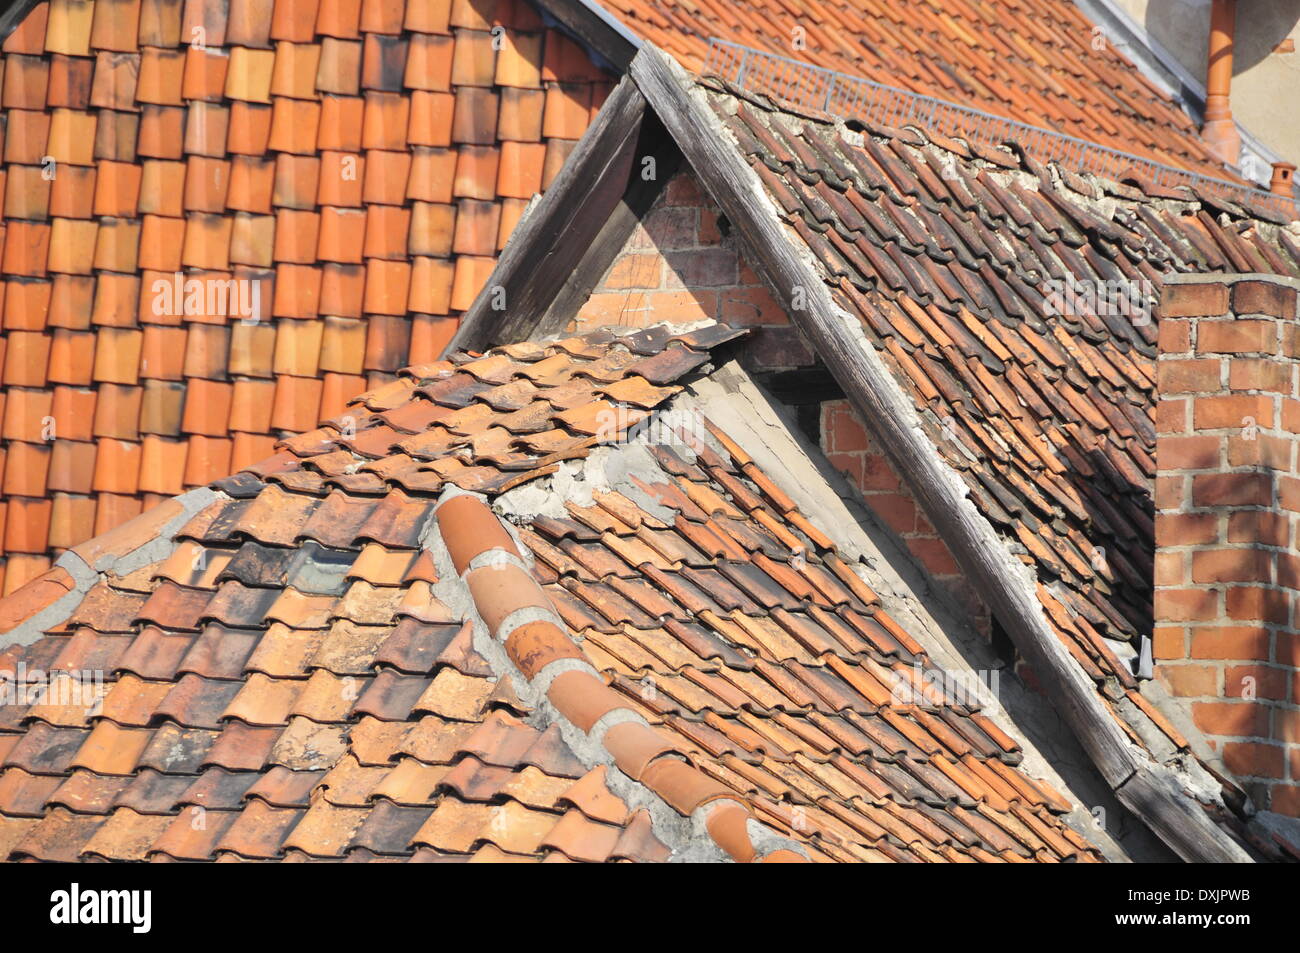 half-timbered houses - Quedlinburg - 14 March 2014. Stock Photo